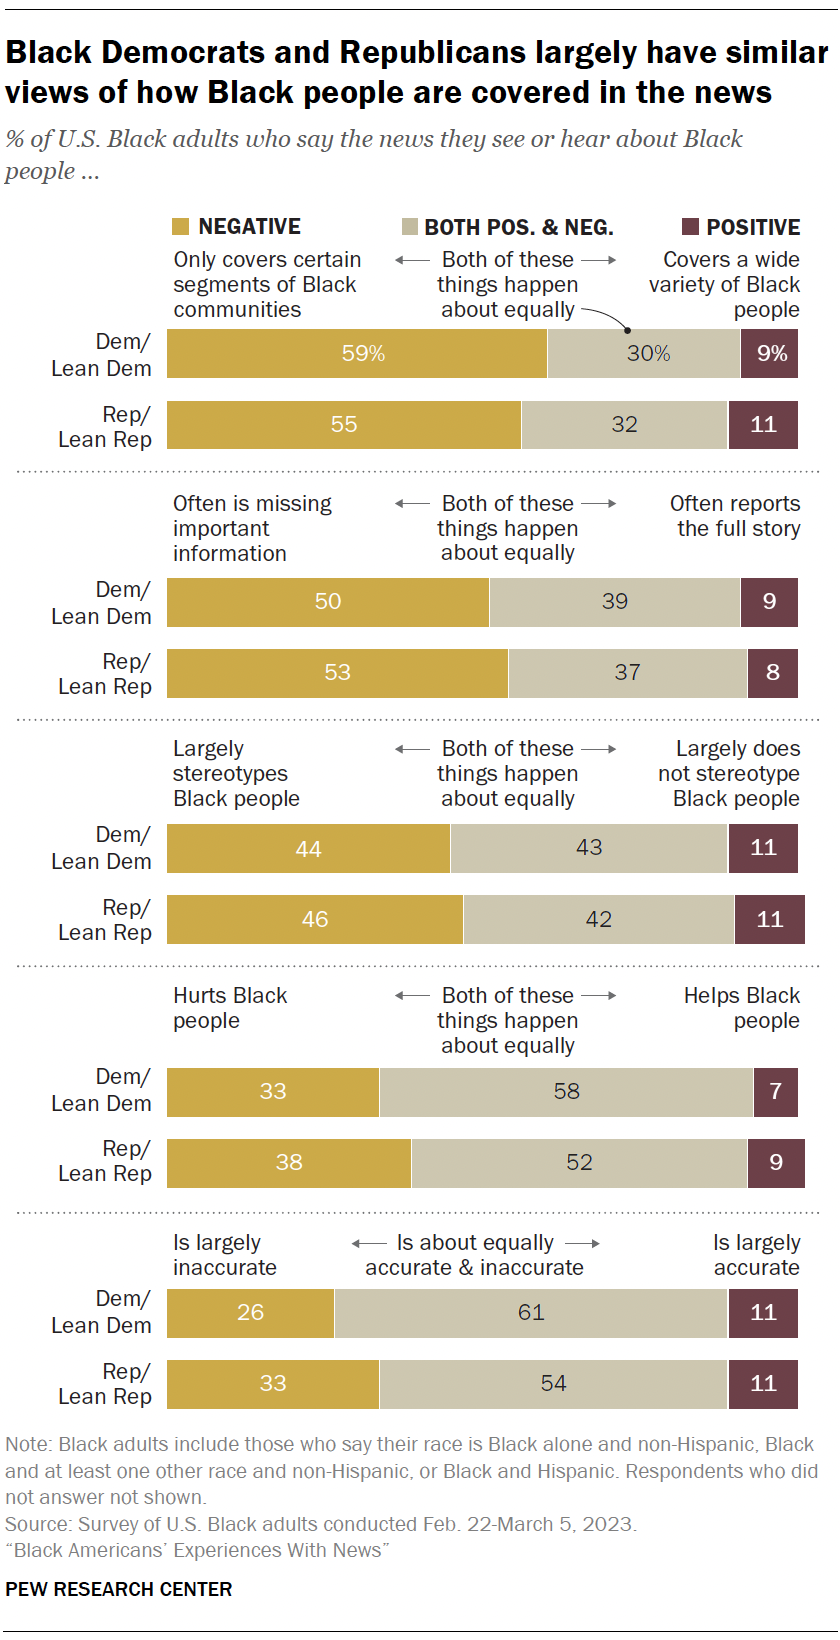 Black Democrats and Republicans largely have similar views of how Black people are covered in the news